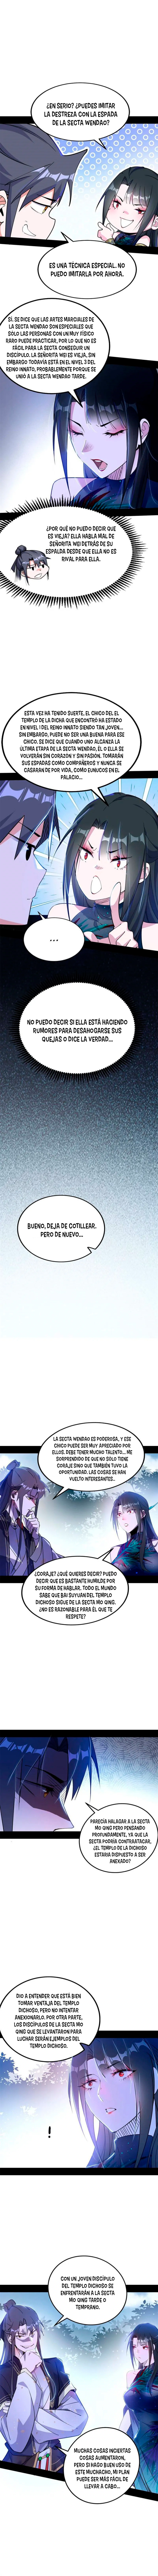 Manga Soy un dios maligno Chapter 315 image number 2